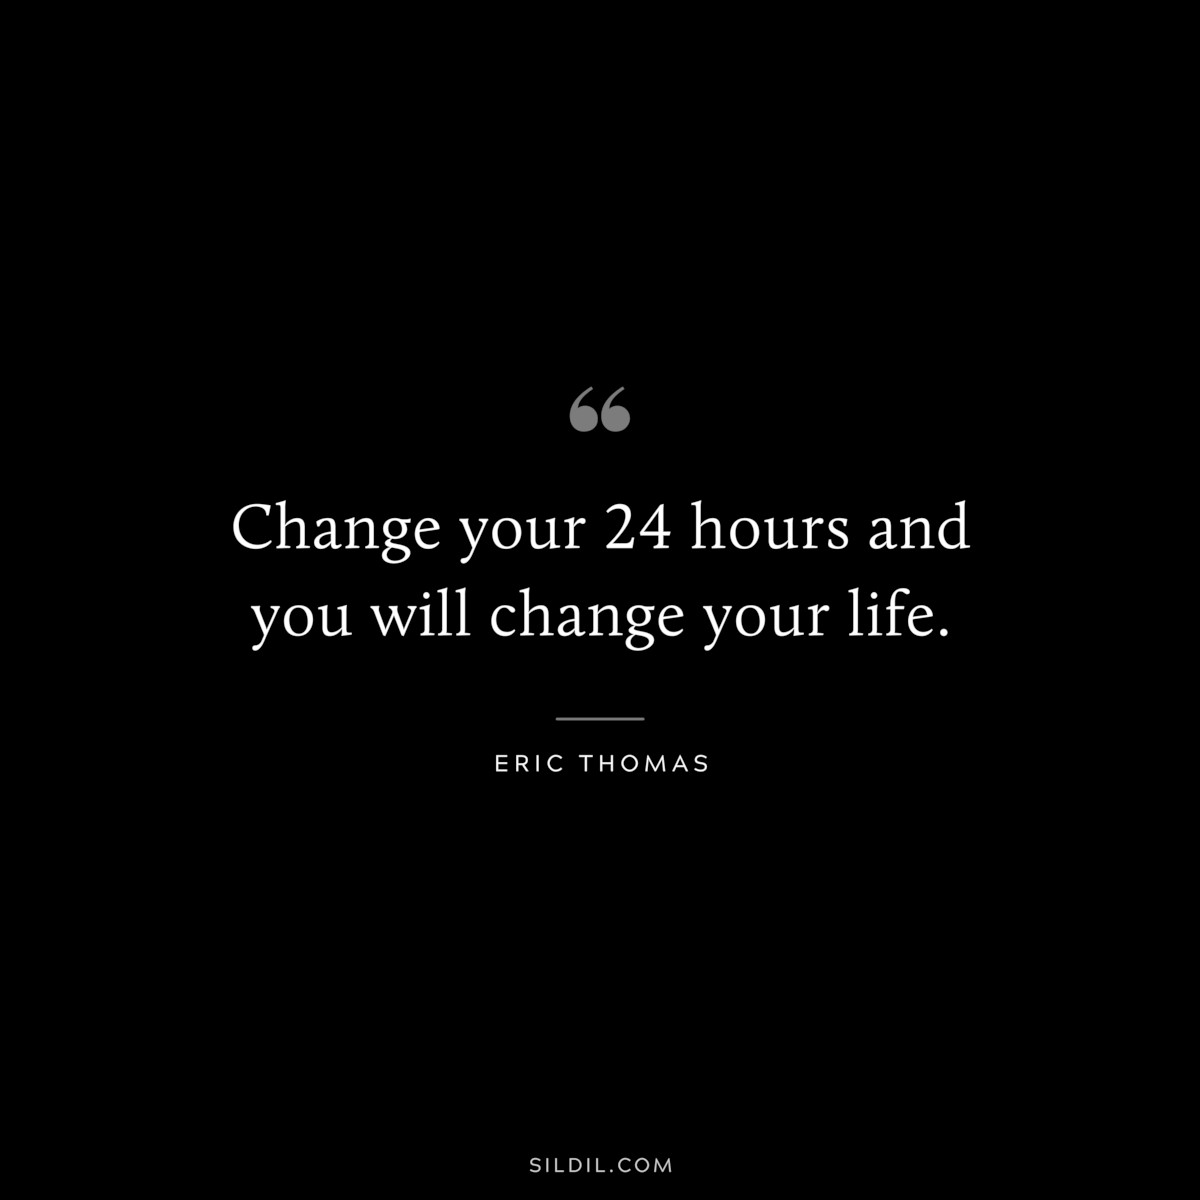 Change your 24 hours and you will change your life. ― Eric Thomas